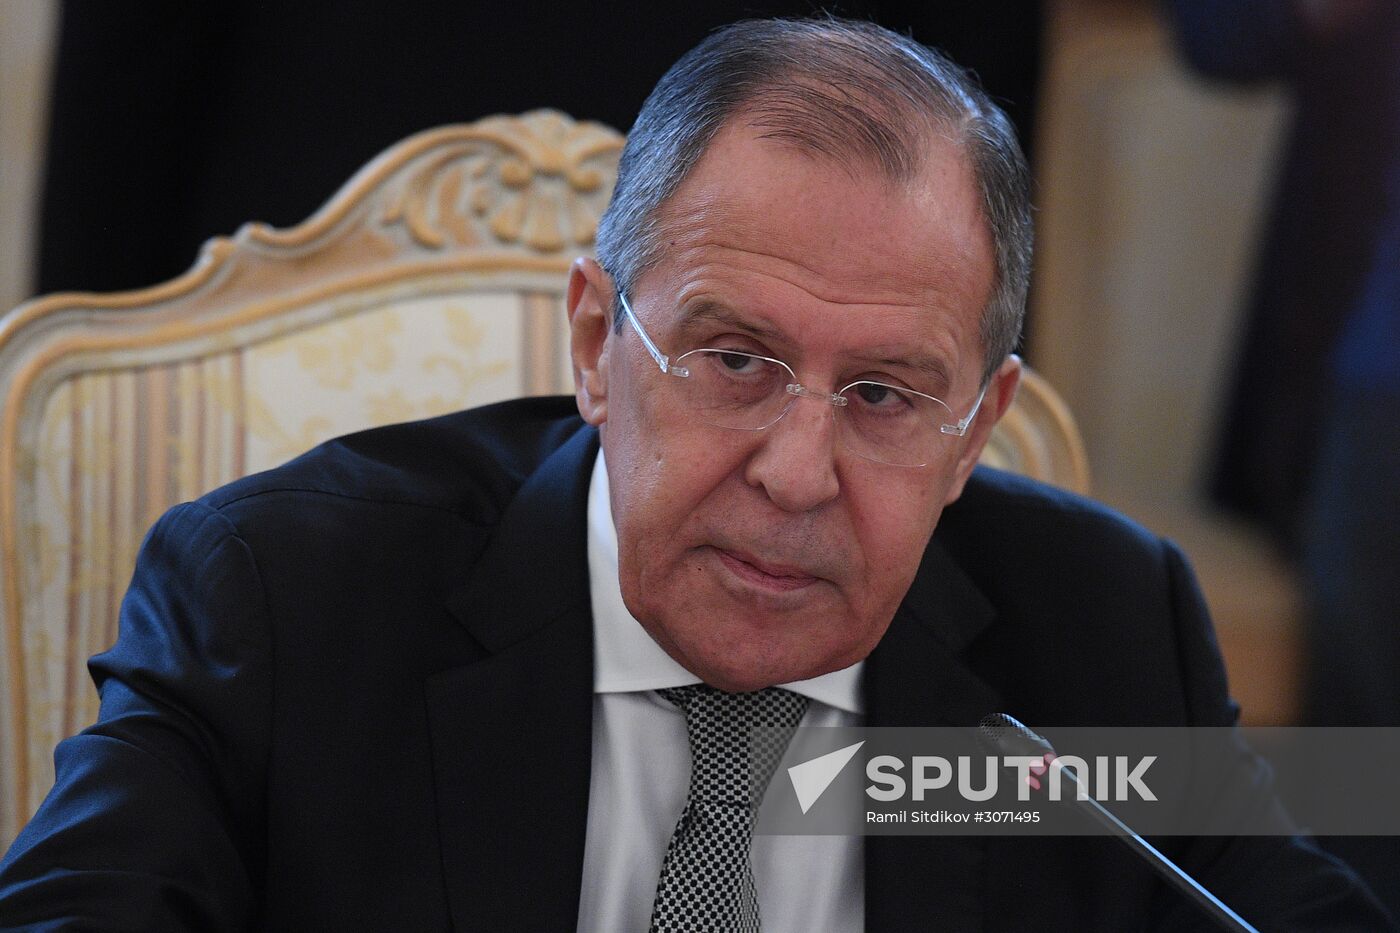 Talks between Foreign Minister Sergei Lavrov and US Secretary of State Rex W. Tillerson